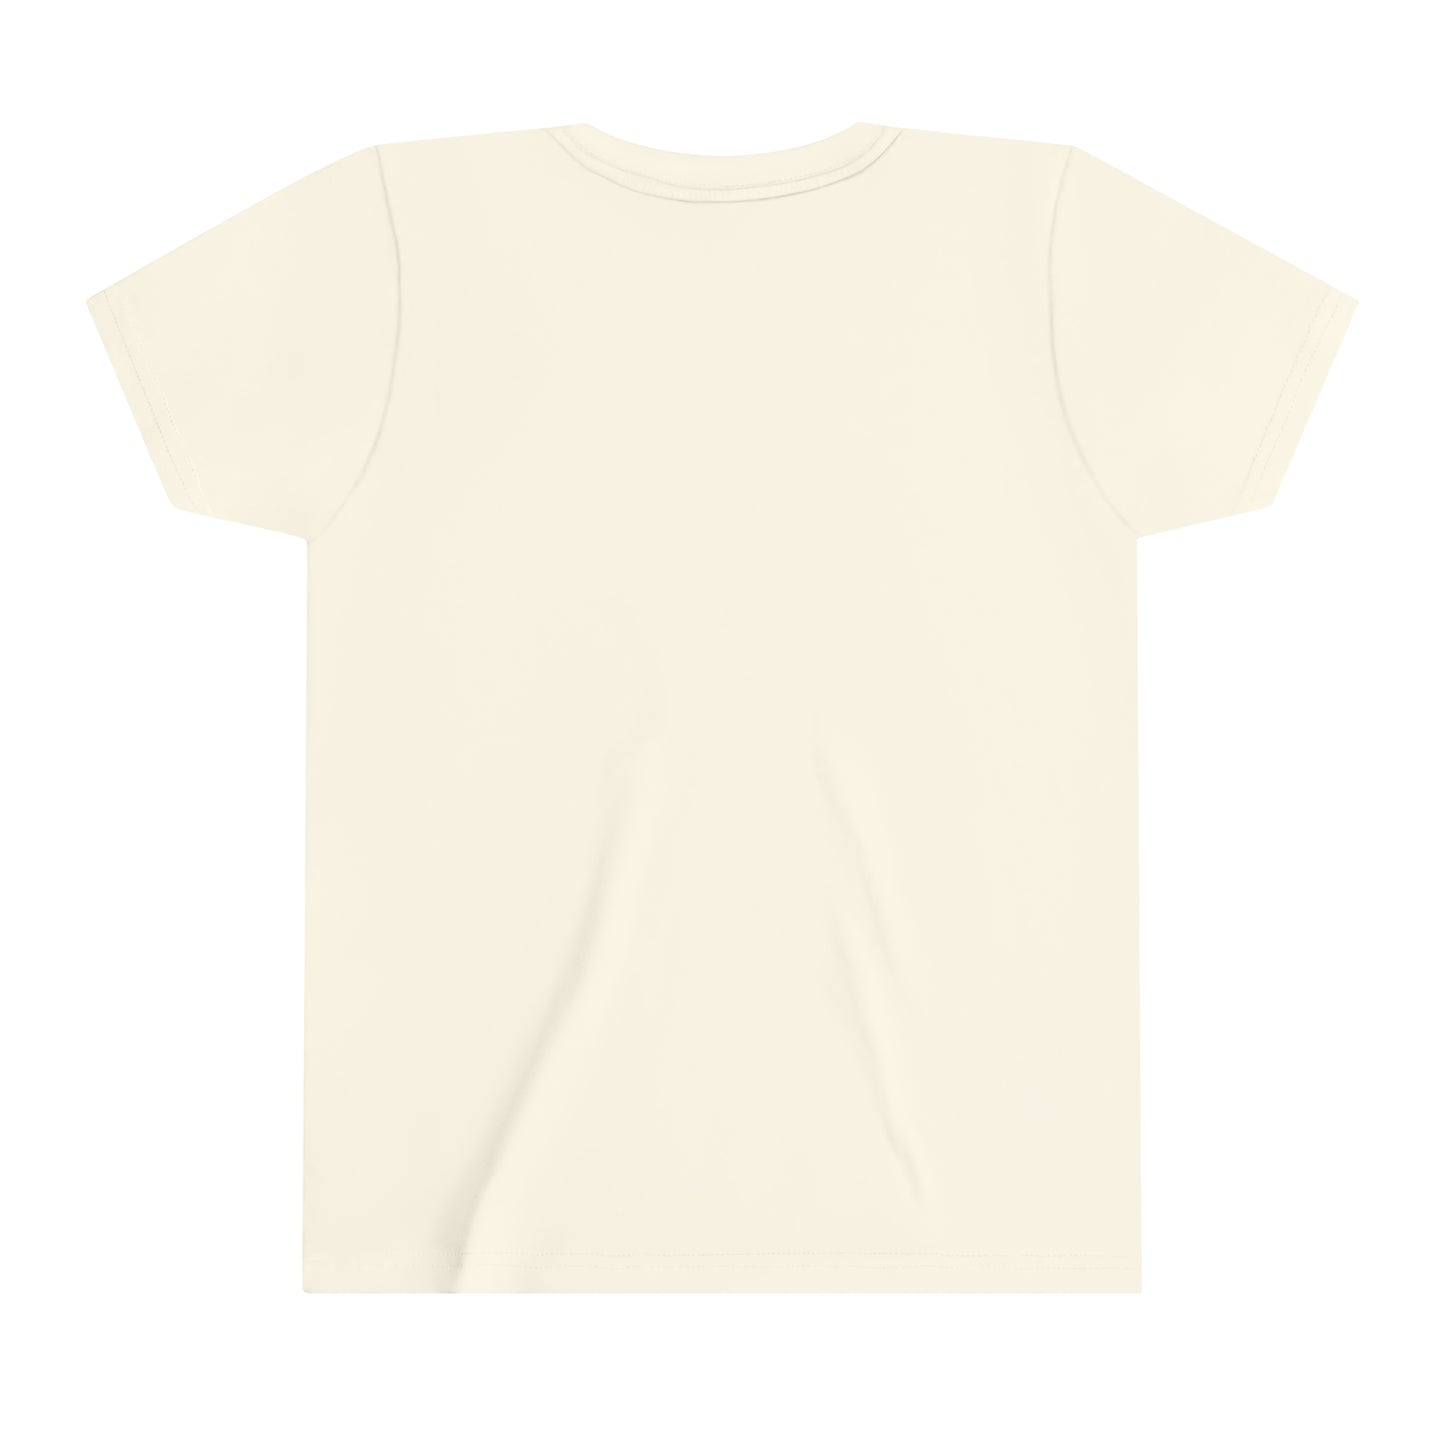 A is for Amazing Youth Short Sleeve Tee